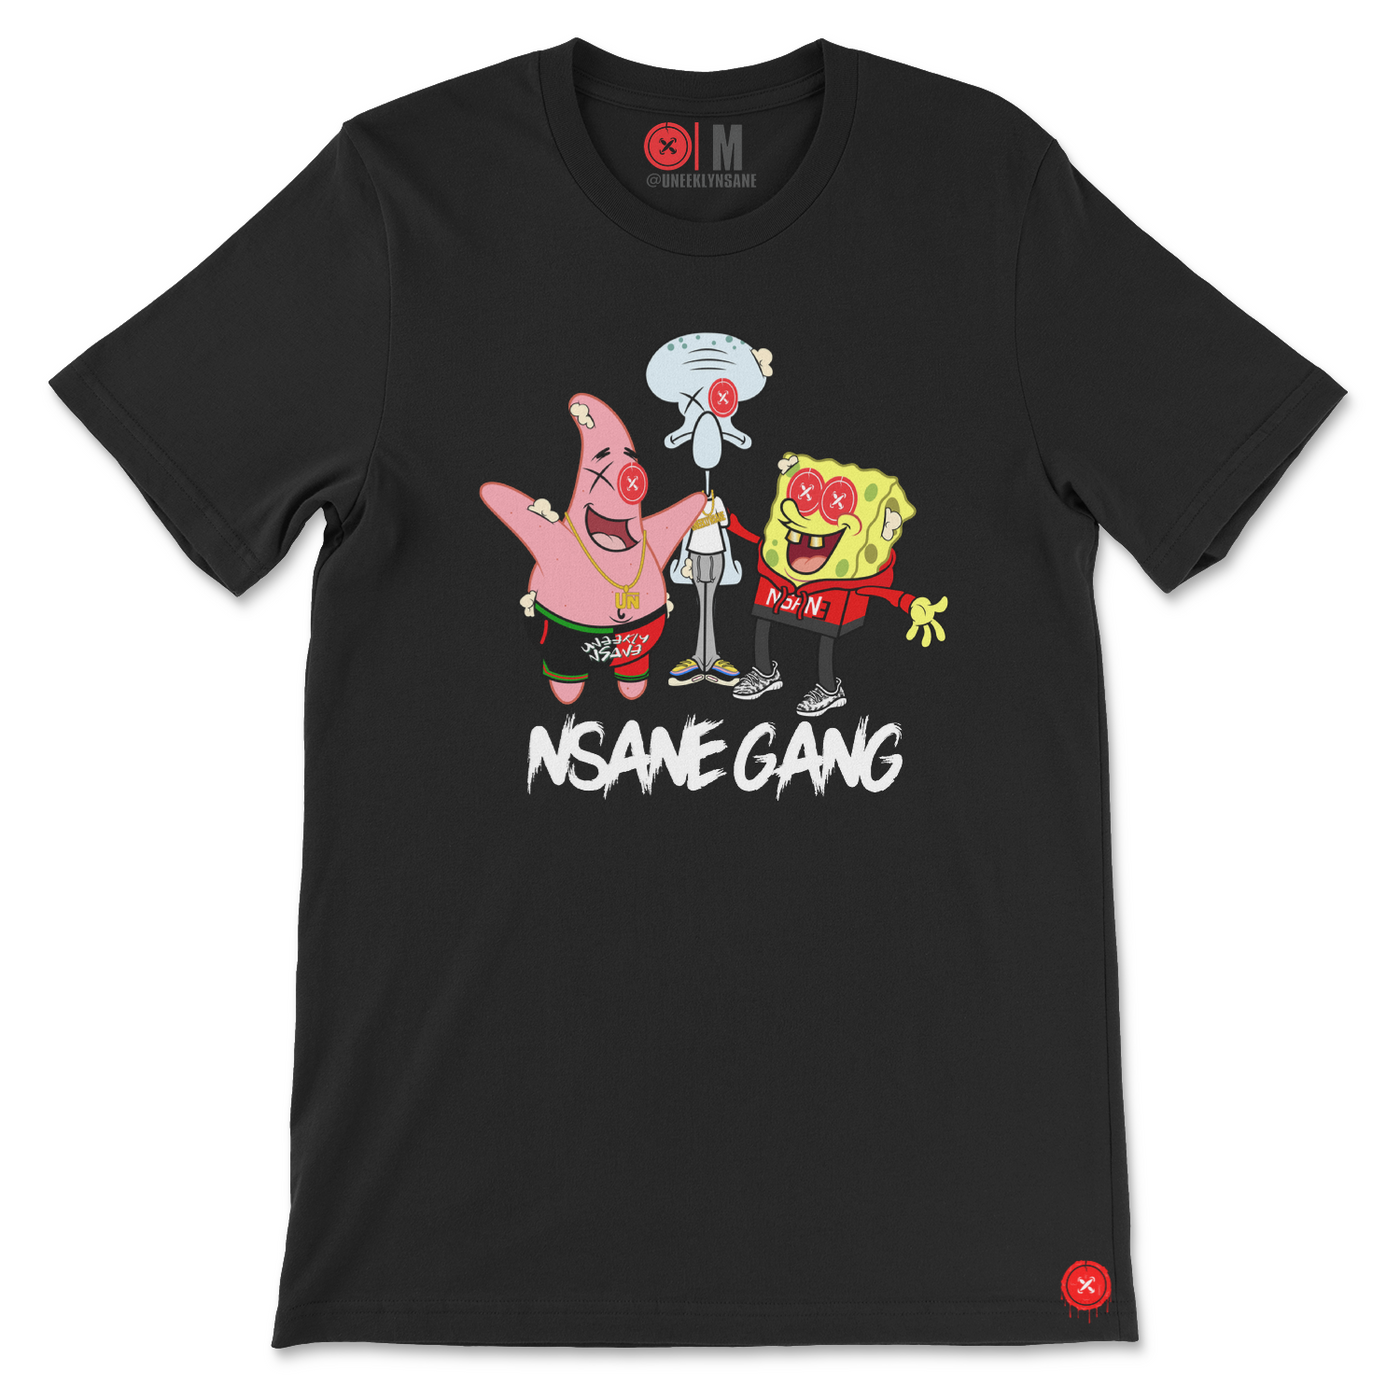 Nsane Gang SB3 TEE - Unique Sweatsuits, hats, tees, shorts, hoodies, Outwear & accessories online | Uneekly Nsane